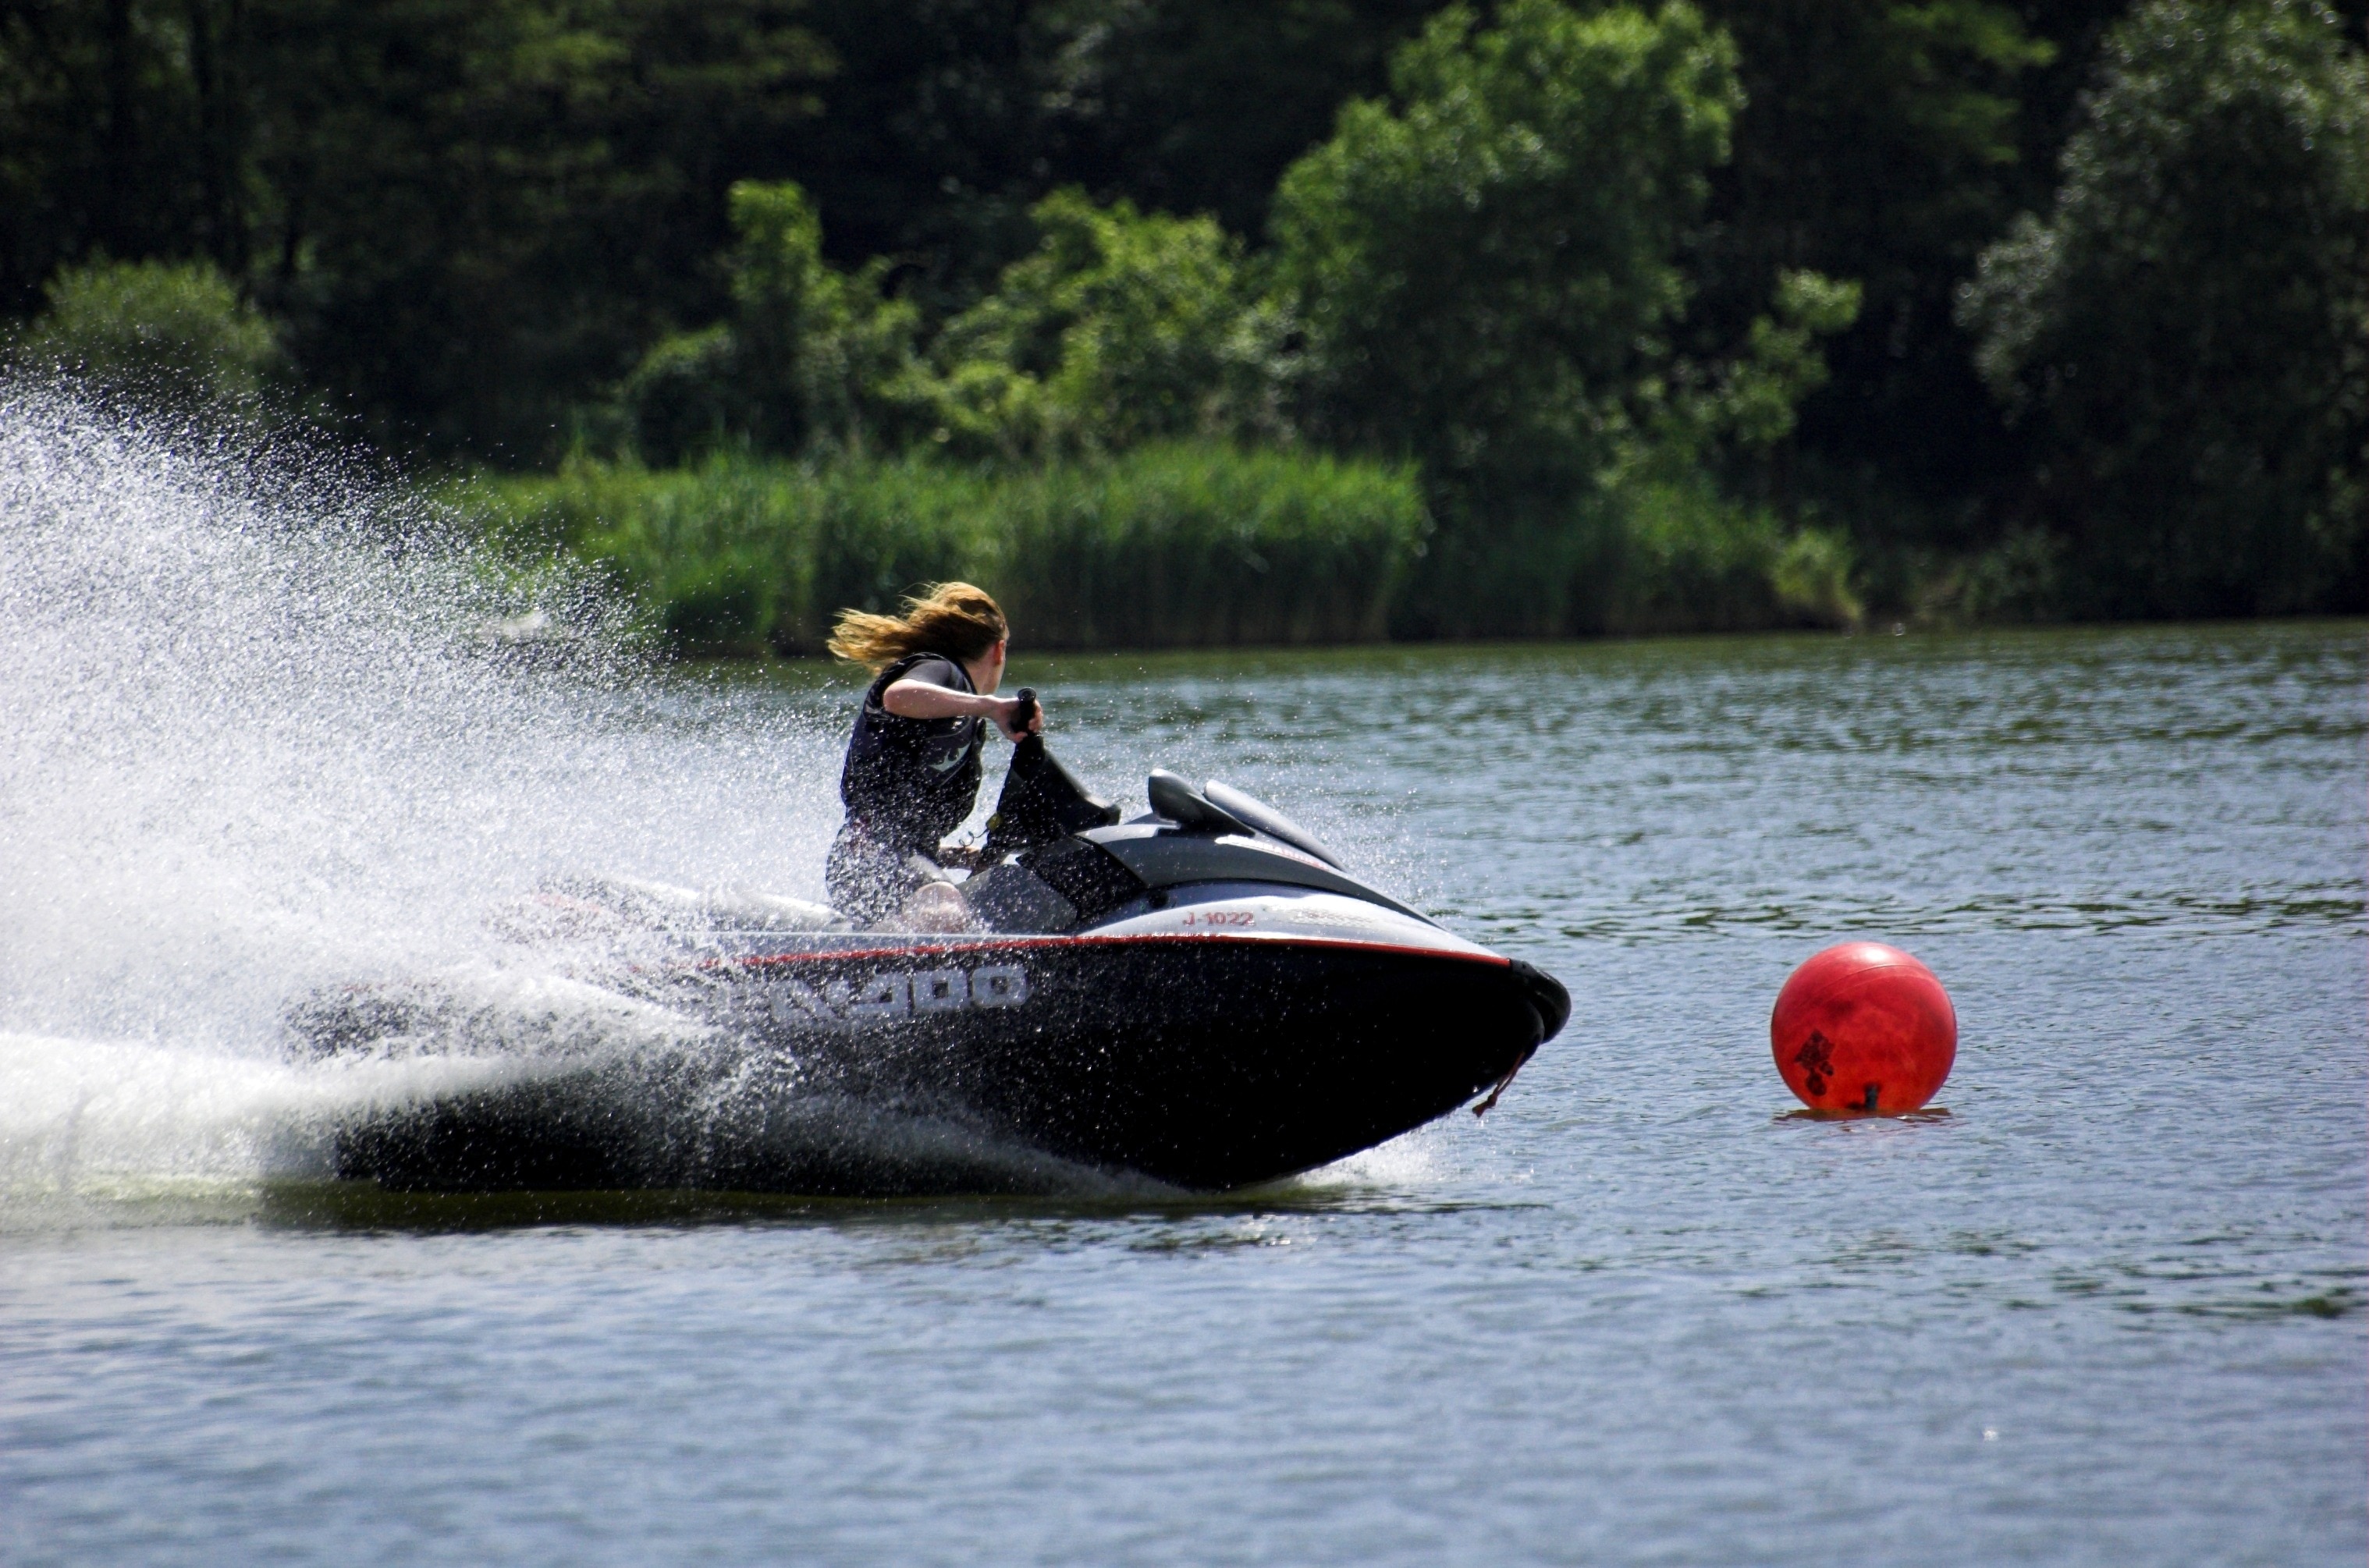 person riding a black personal water craft during day time